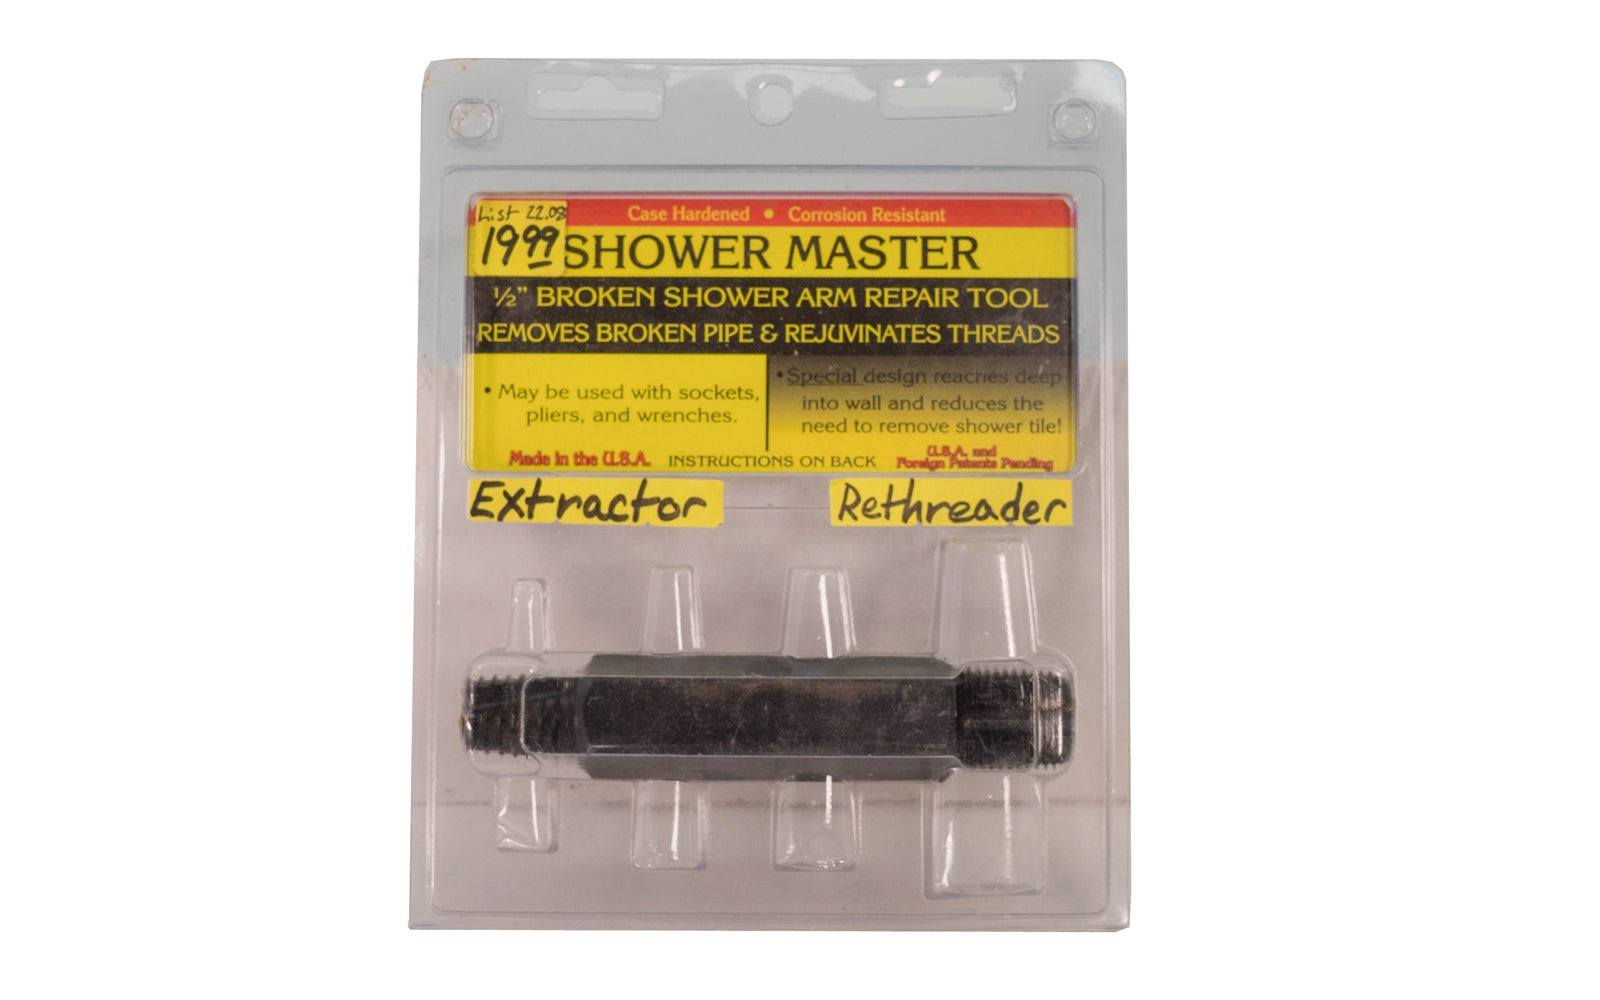 1/2" Broken Shower Arm Repair Tool. Removes broken pipe & rejuvenates threads. May be used with sockets, pliers, & wrenches.  Made in USA.